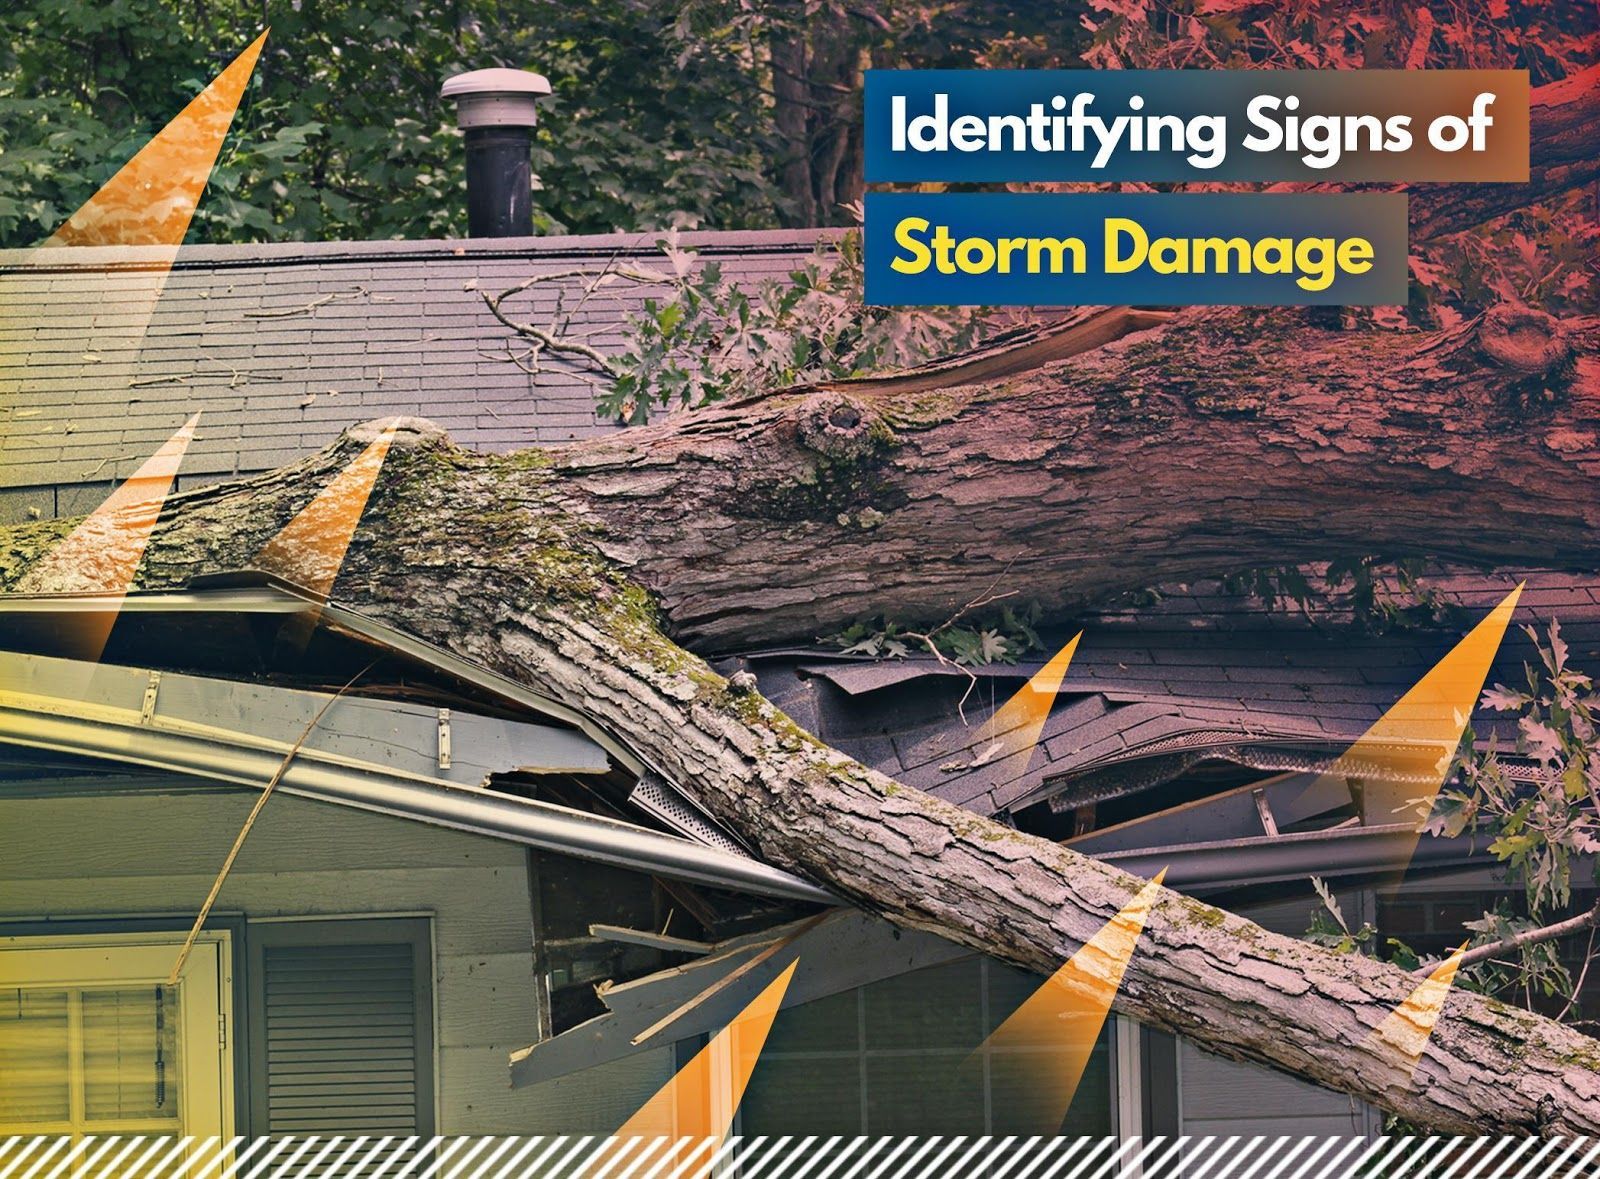 Identifying Signs of Storm Damage